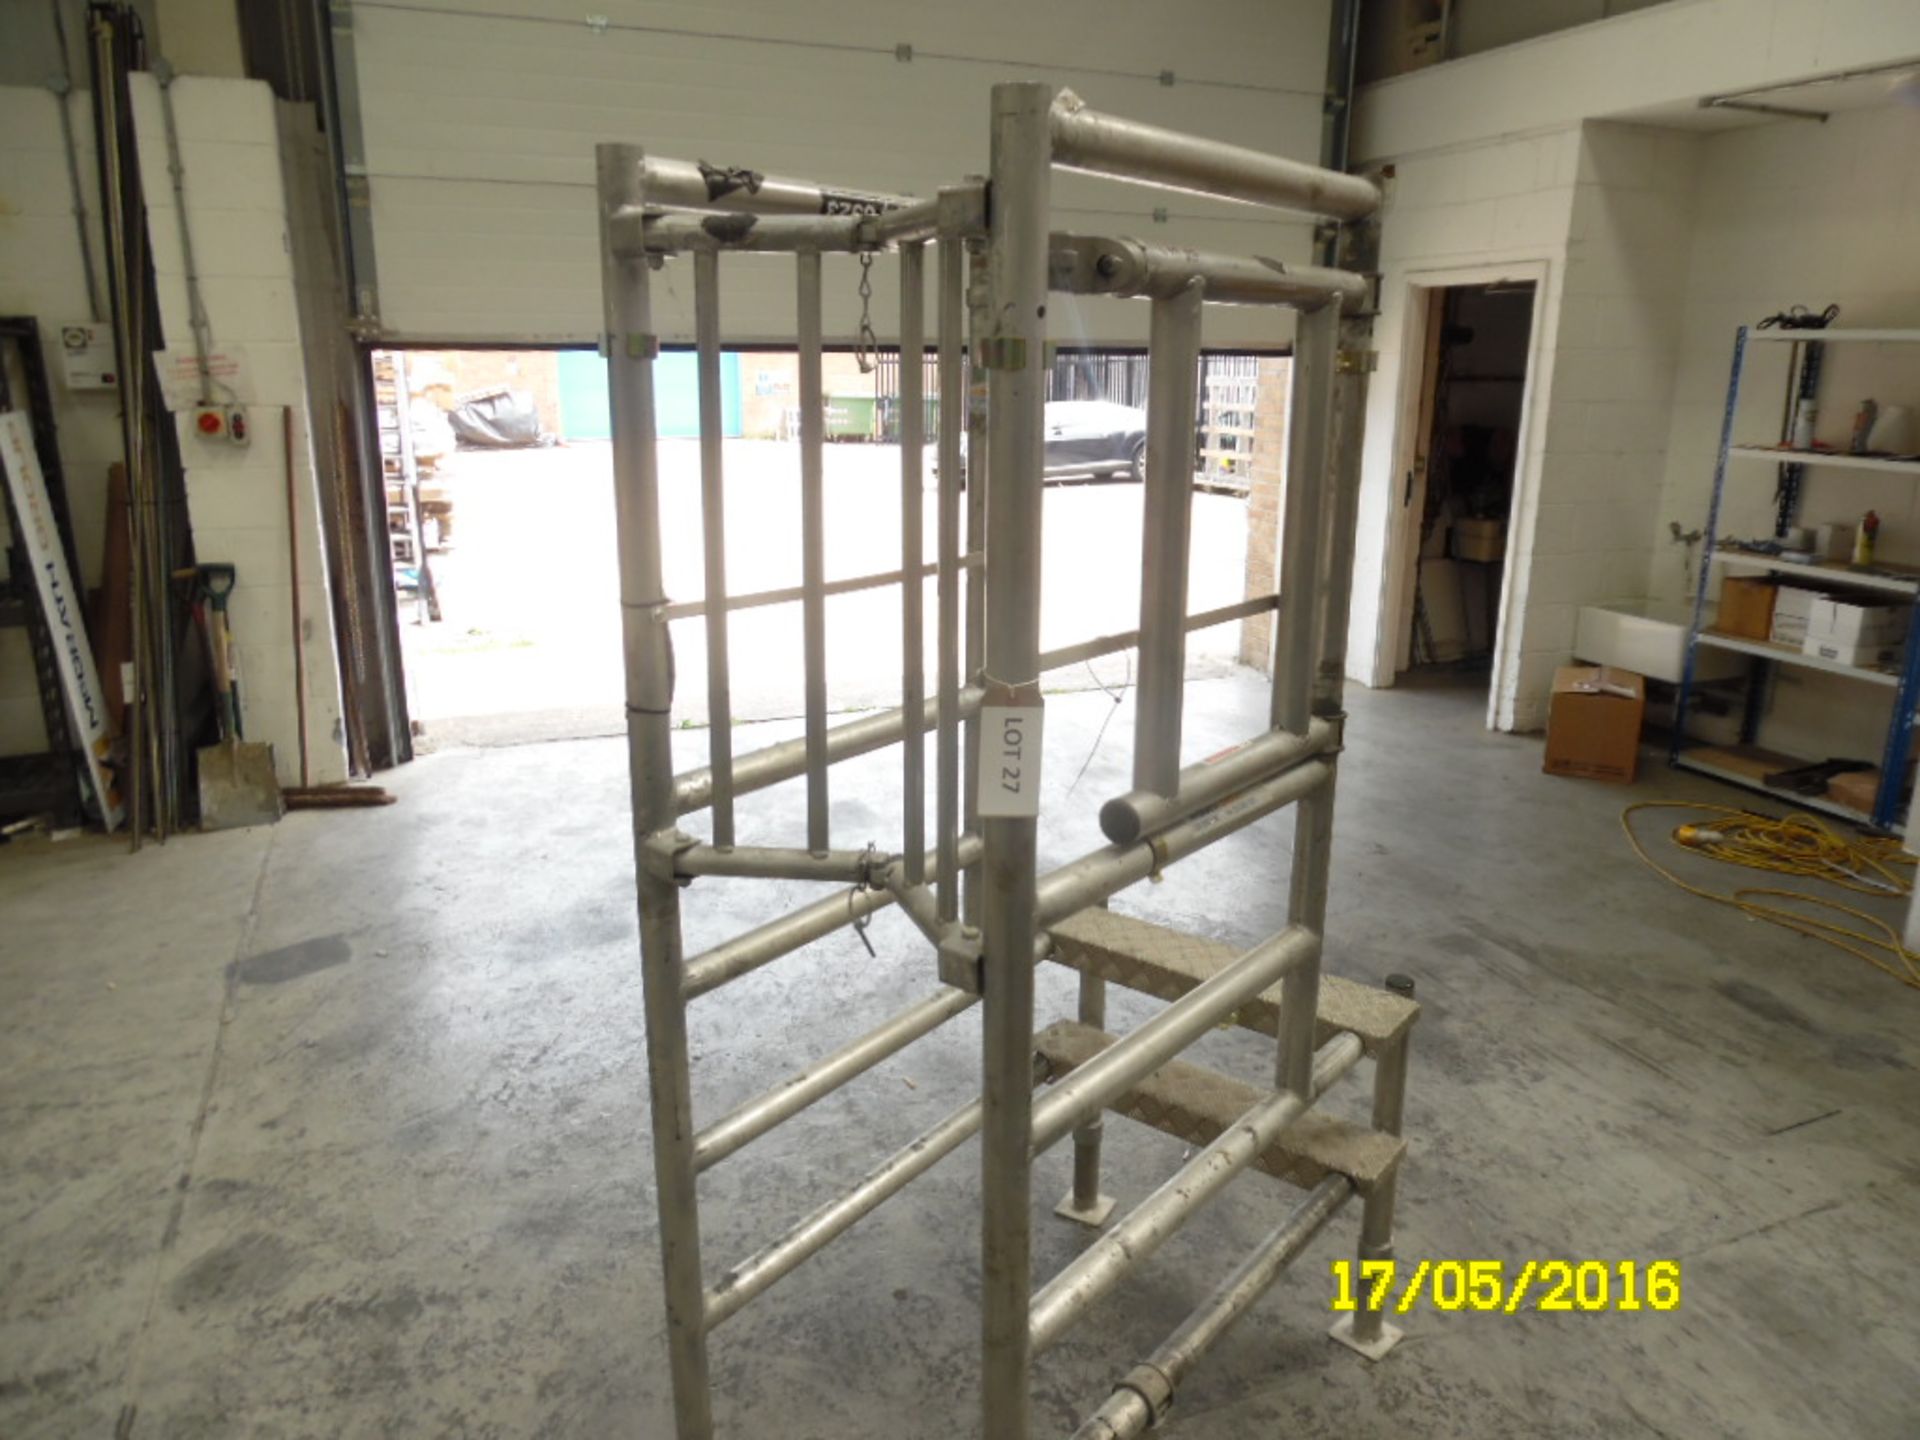 Lyte aluminium mobile access podium, SWL 150kg, this lot must be certificated before use